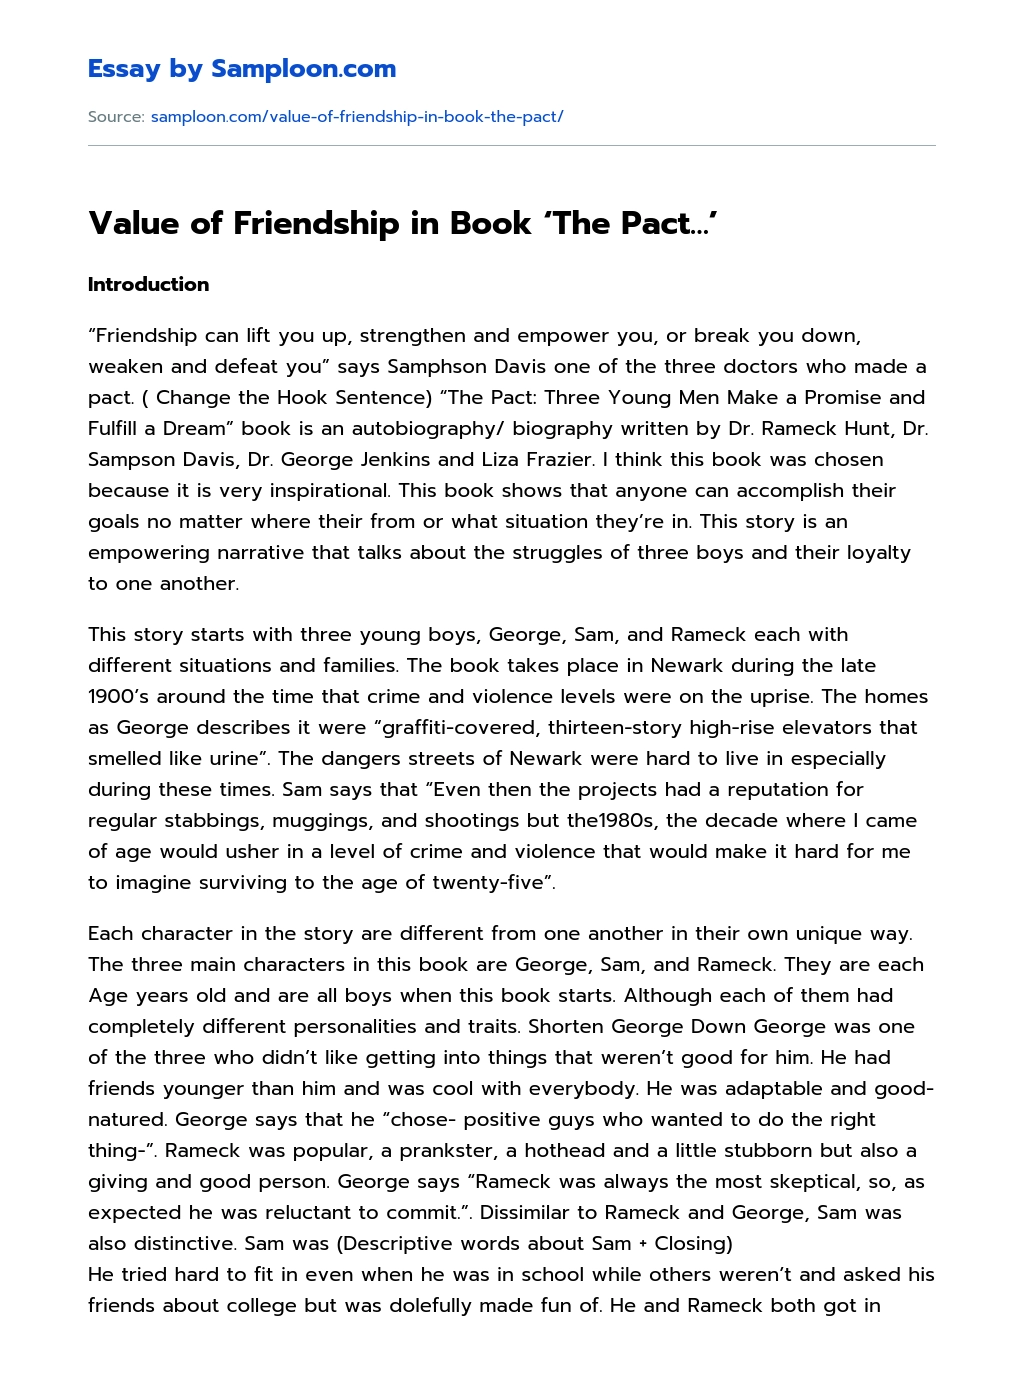 Value of Friendship in Book ‘The Pact…’ Summary essay